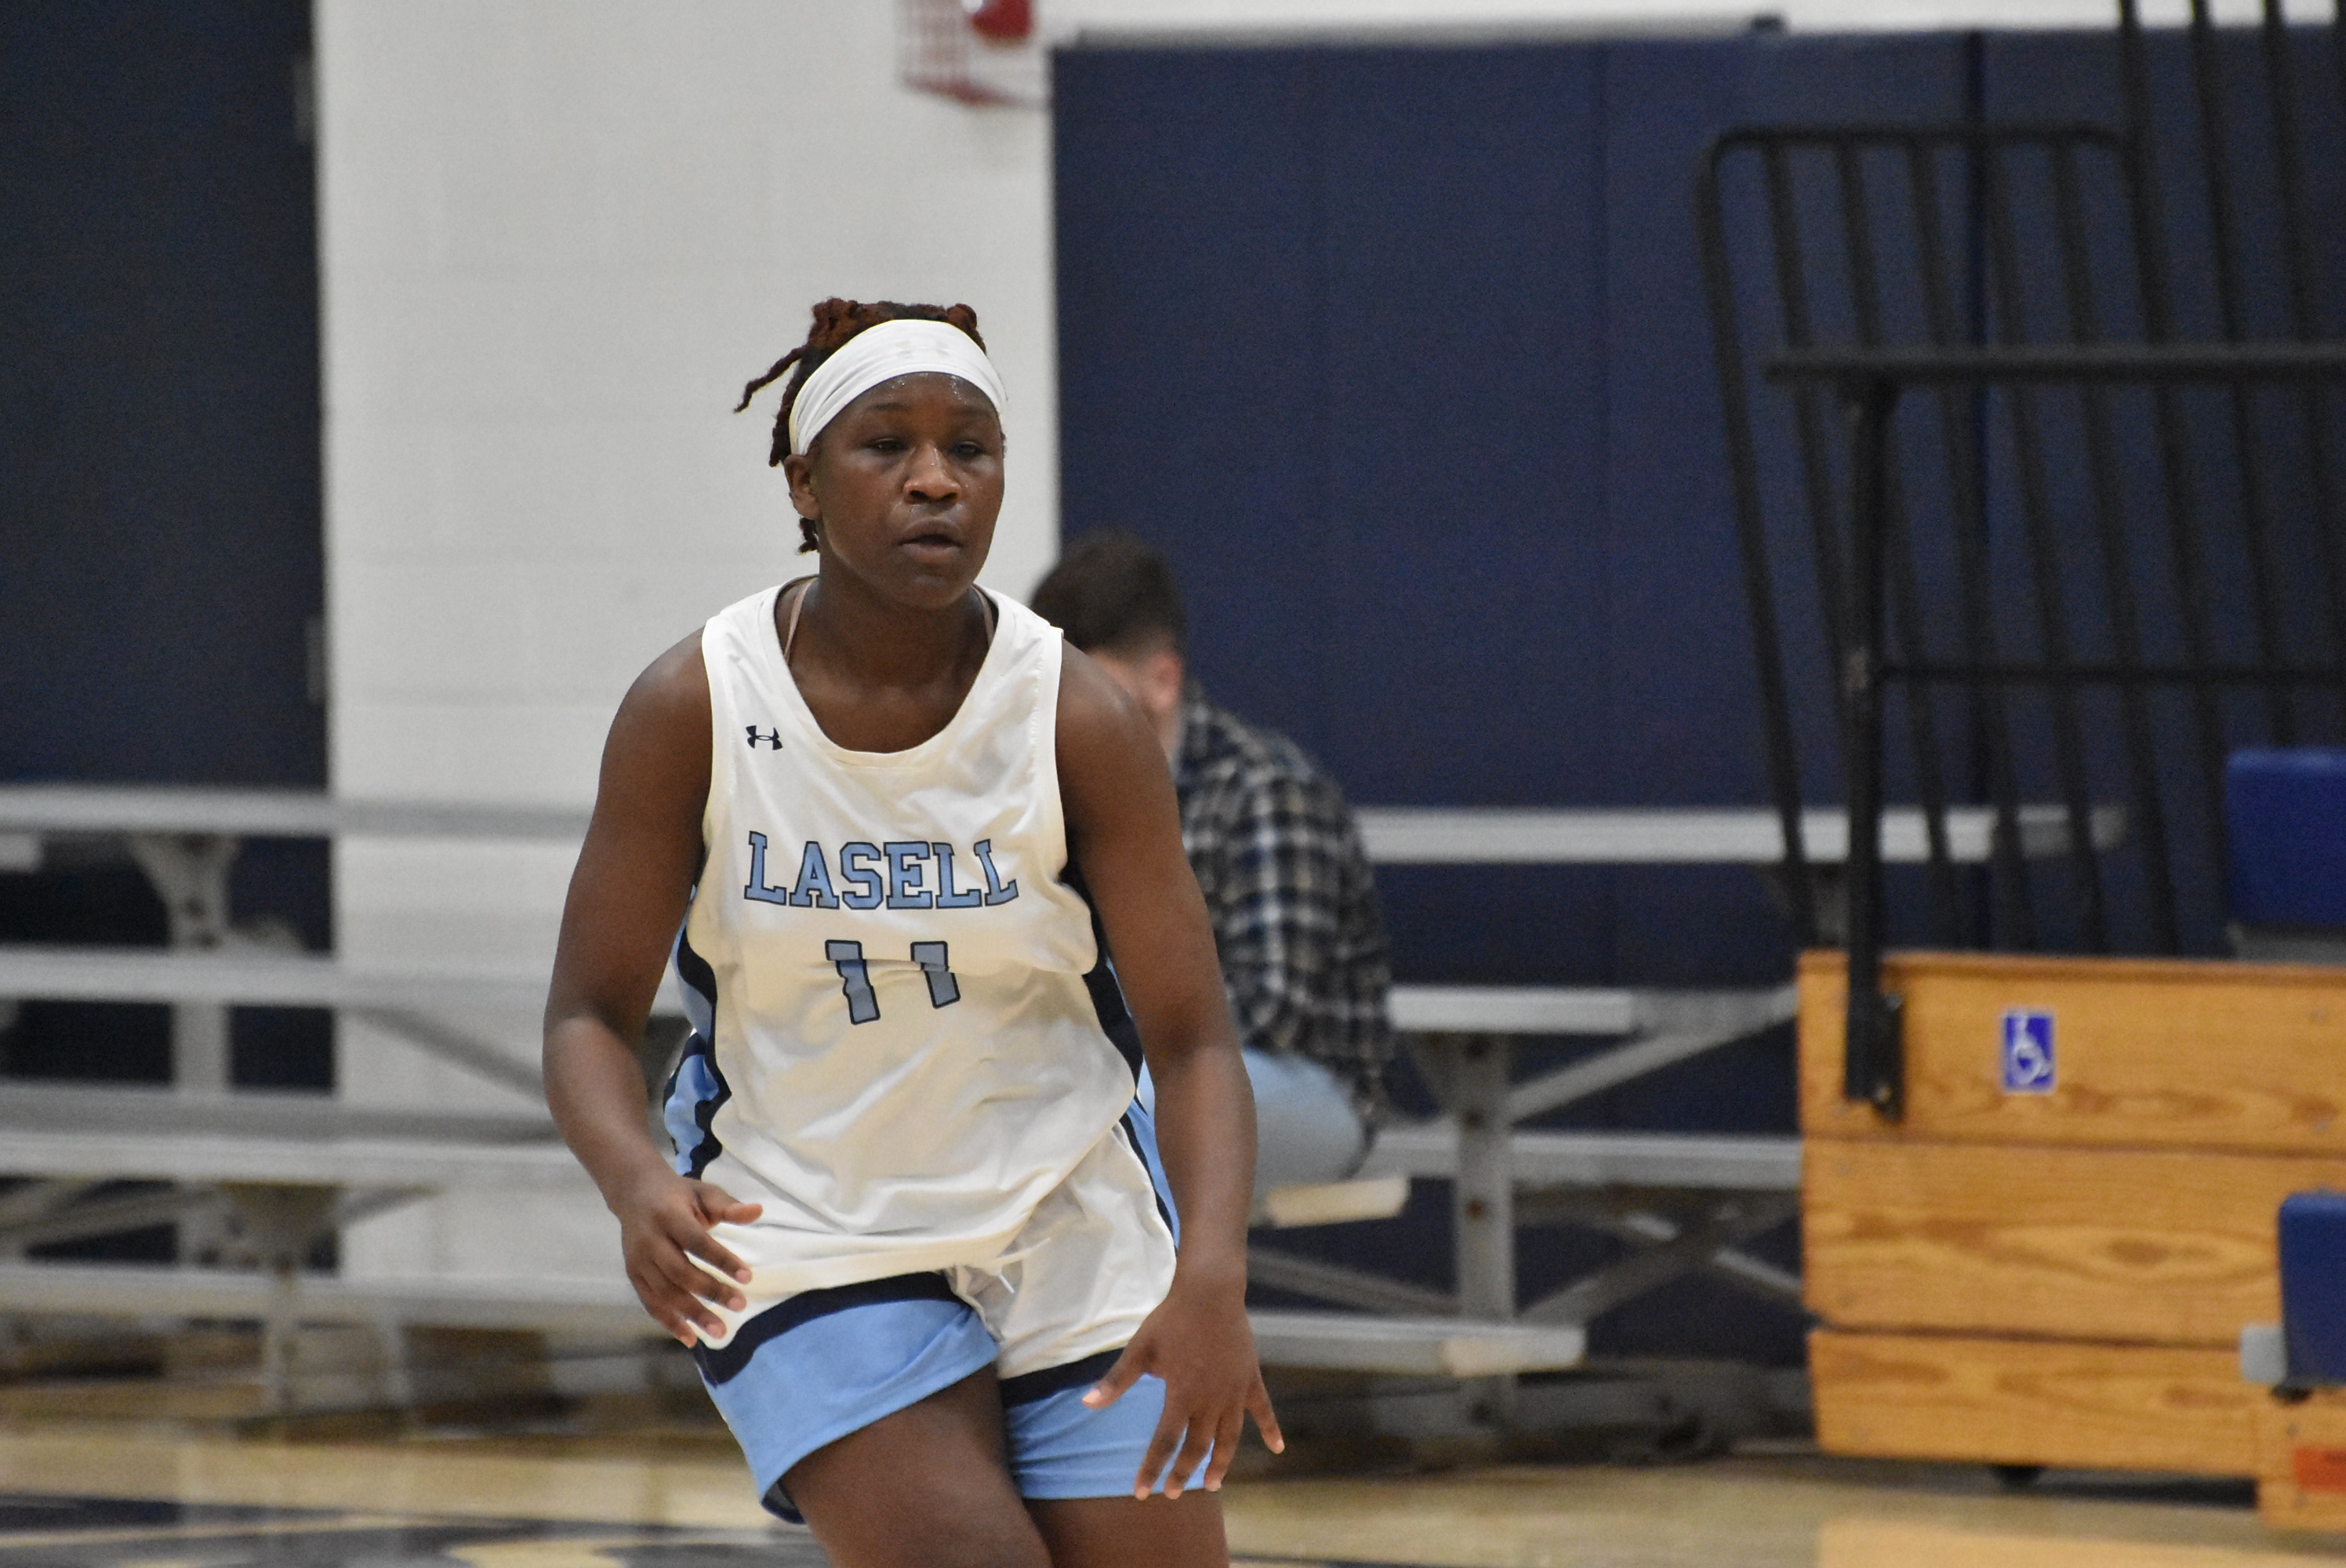 WBB: Lasers Lose To Tough Opponent in OT